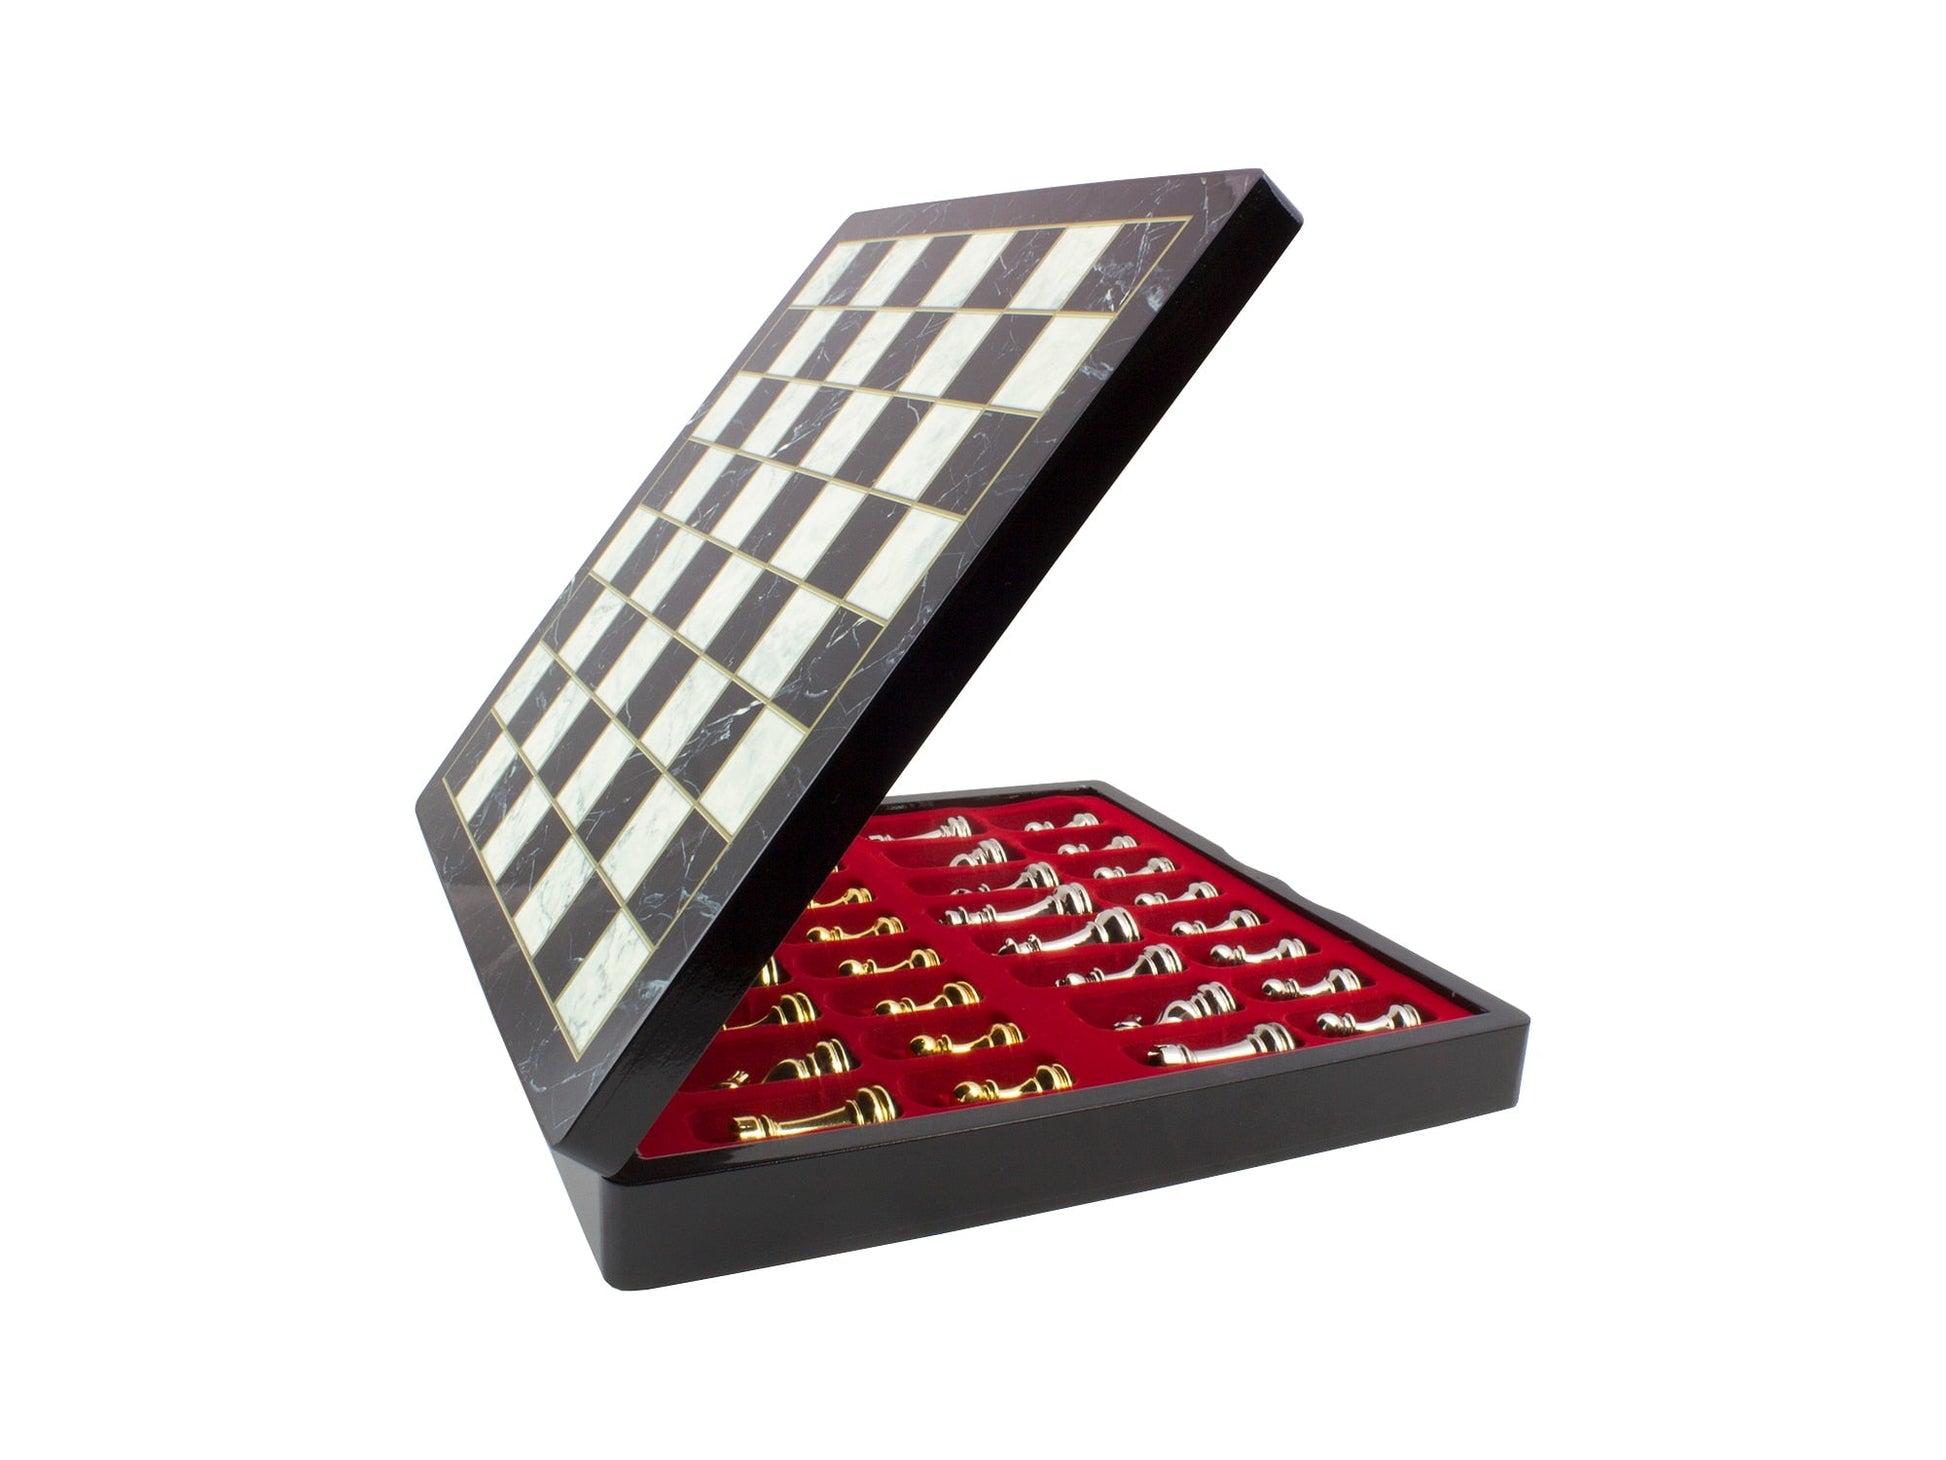 Luxury Marble Patterned Chess Box Set with Gold & Silver Colored Metal Staunton Chessmen (box open)